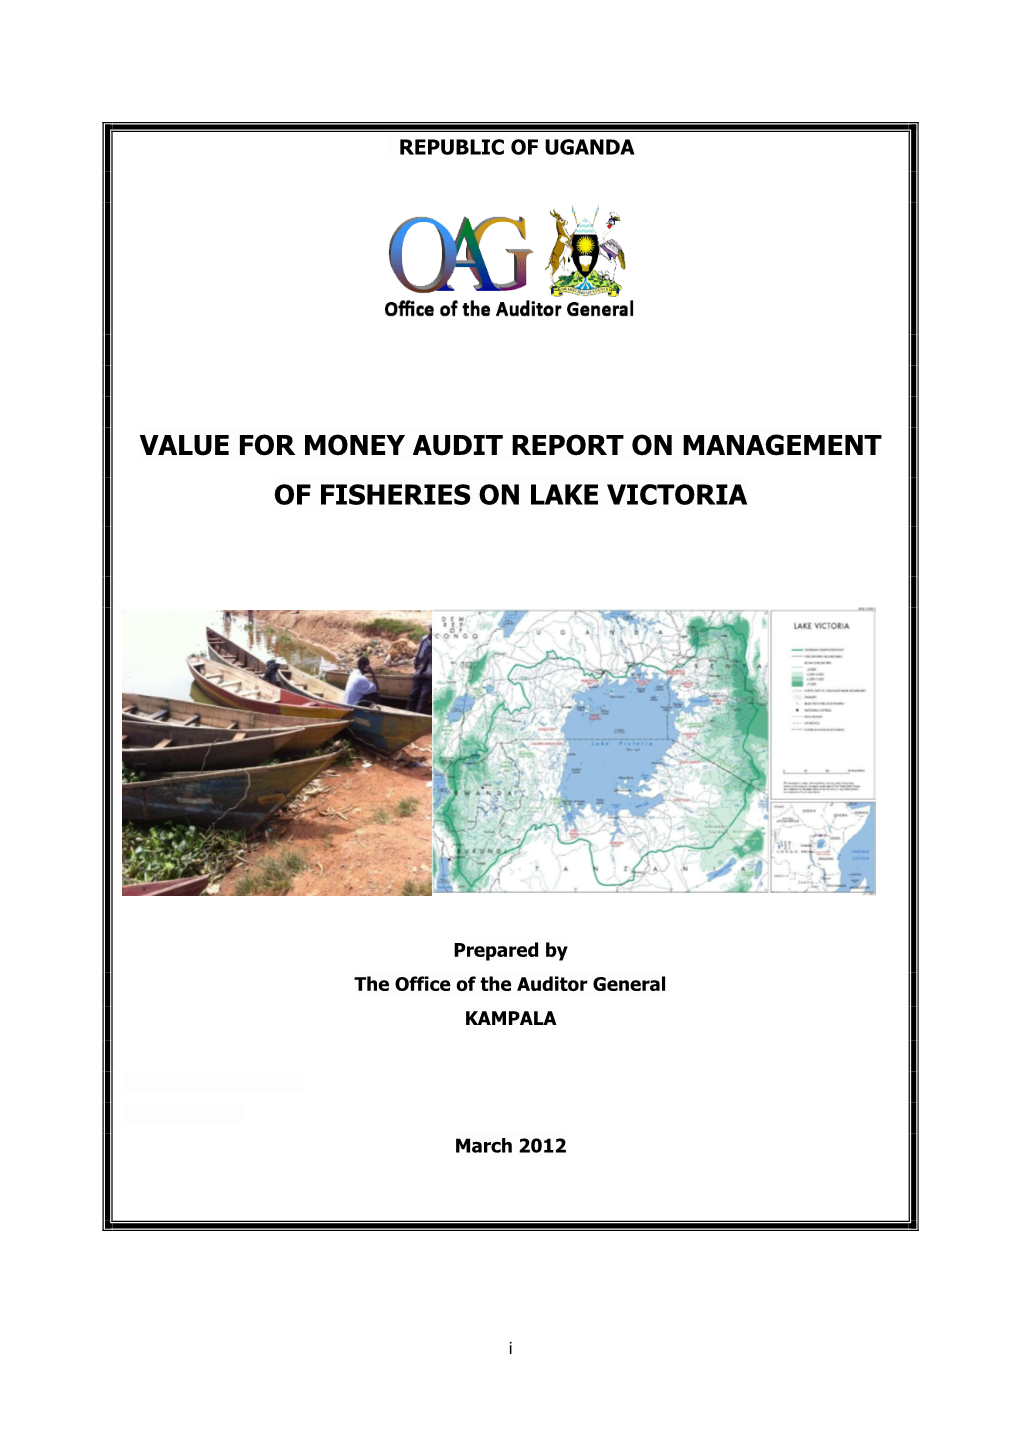 Value for Money Audit Report on Management of Fisheries on Lake Victoria